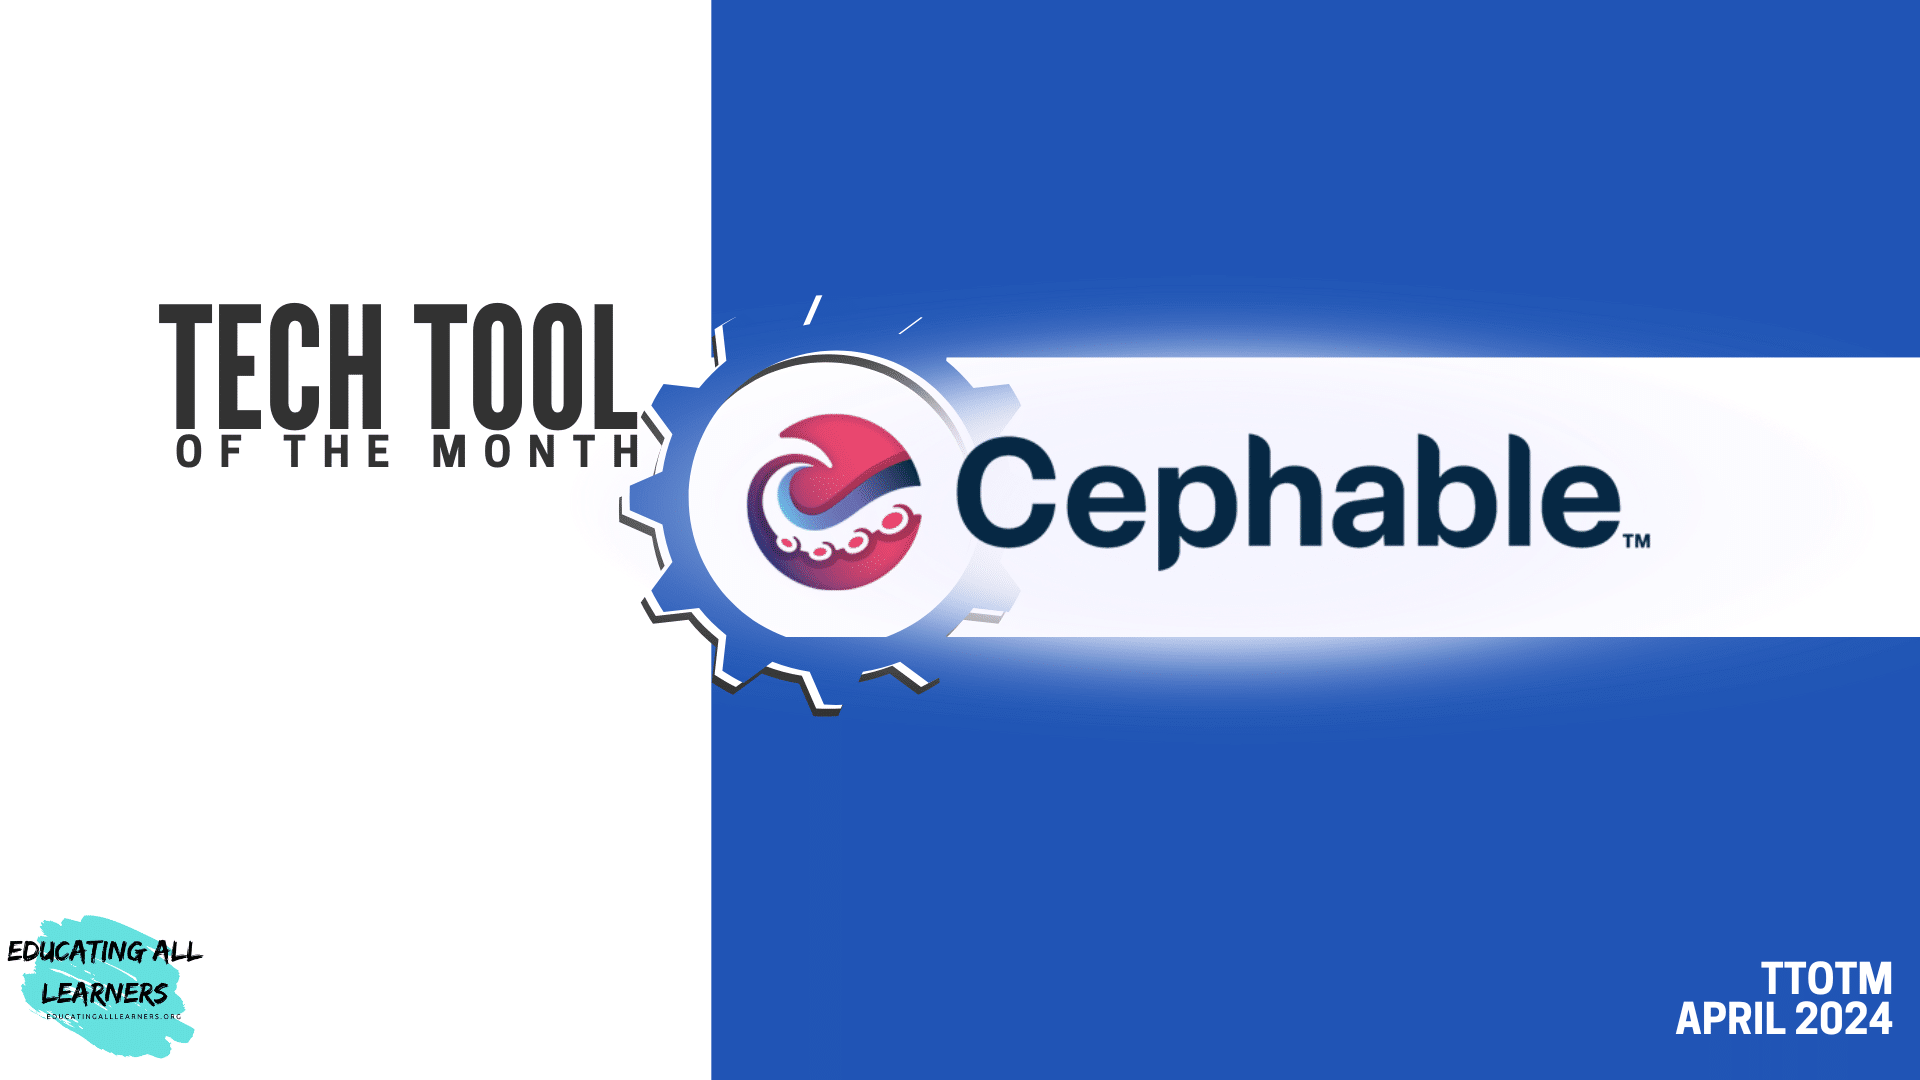 Tech tool of the month: cephable